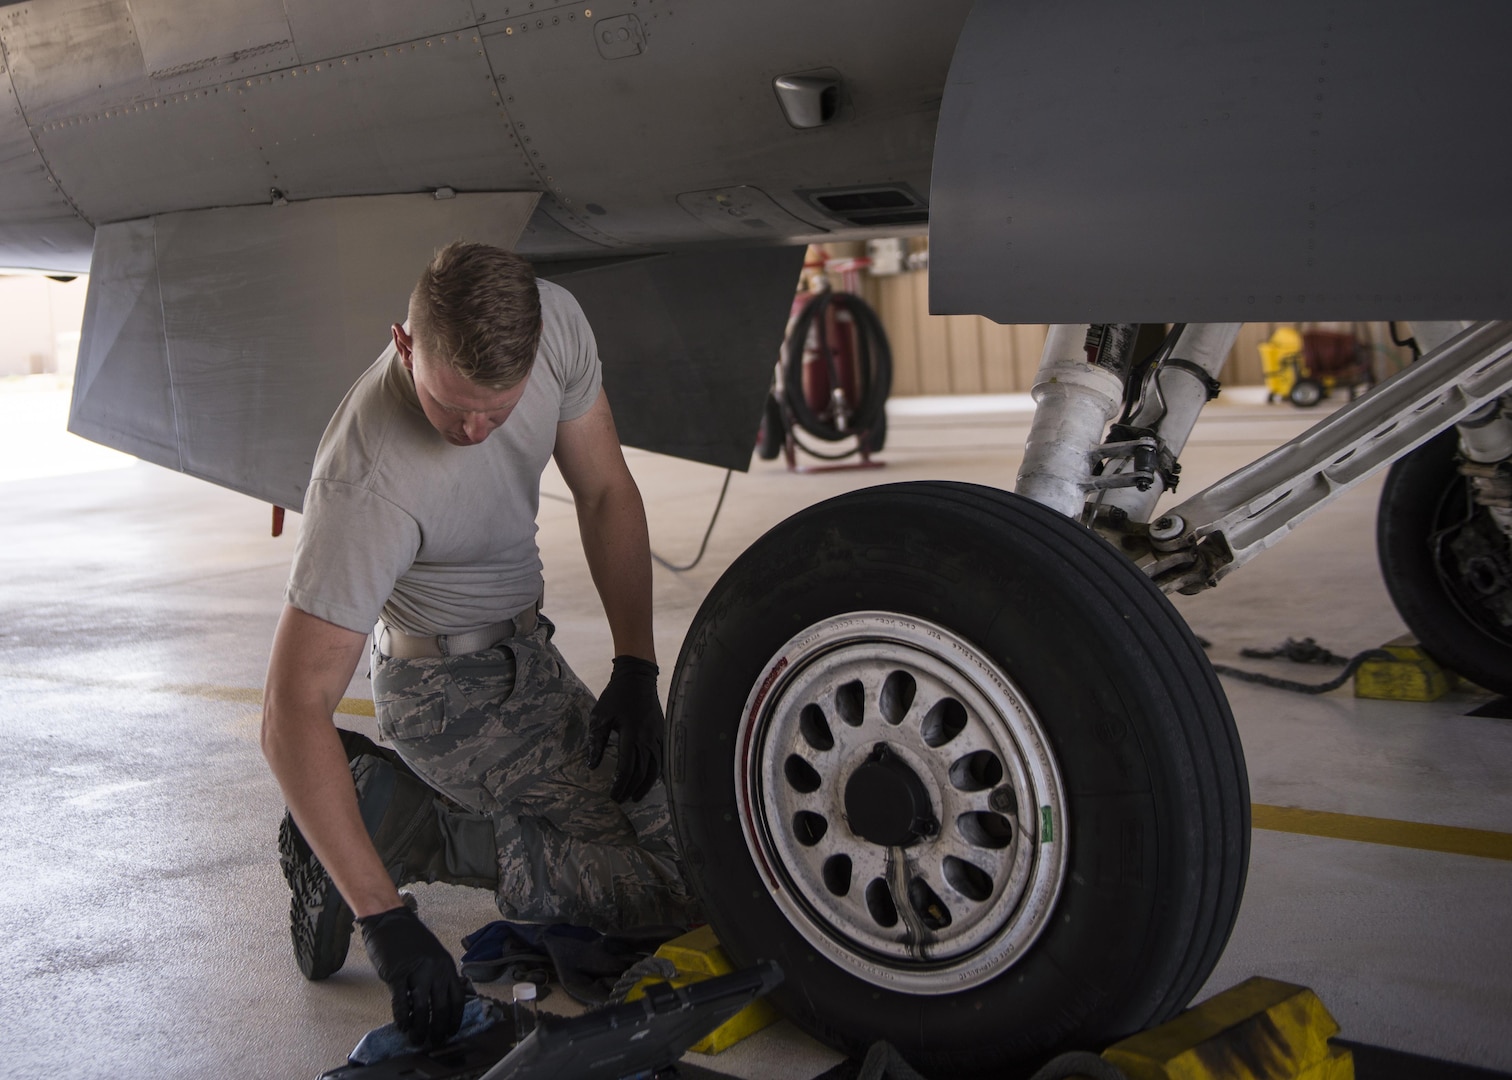 Airman 1st Class Derek King, a 54th Aircraft Maintenance Unit F-16 crew chief, performs maintenance on an F-16 Fighting Falcon at Holloman Air Force Base, N.M. on May 3, 2017. The 54th AMU runs 24 hour operations. Therefore, Holloman’s maintenance Airmen work round-the-clock to keep these aircraft operable and flying. (U.S. Air Force photo by Airman 1st Class Alexis P. Docherty)